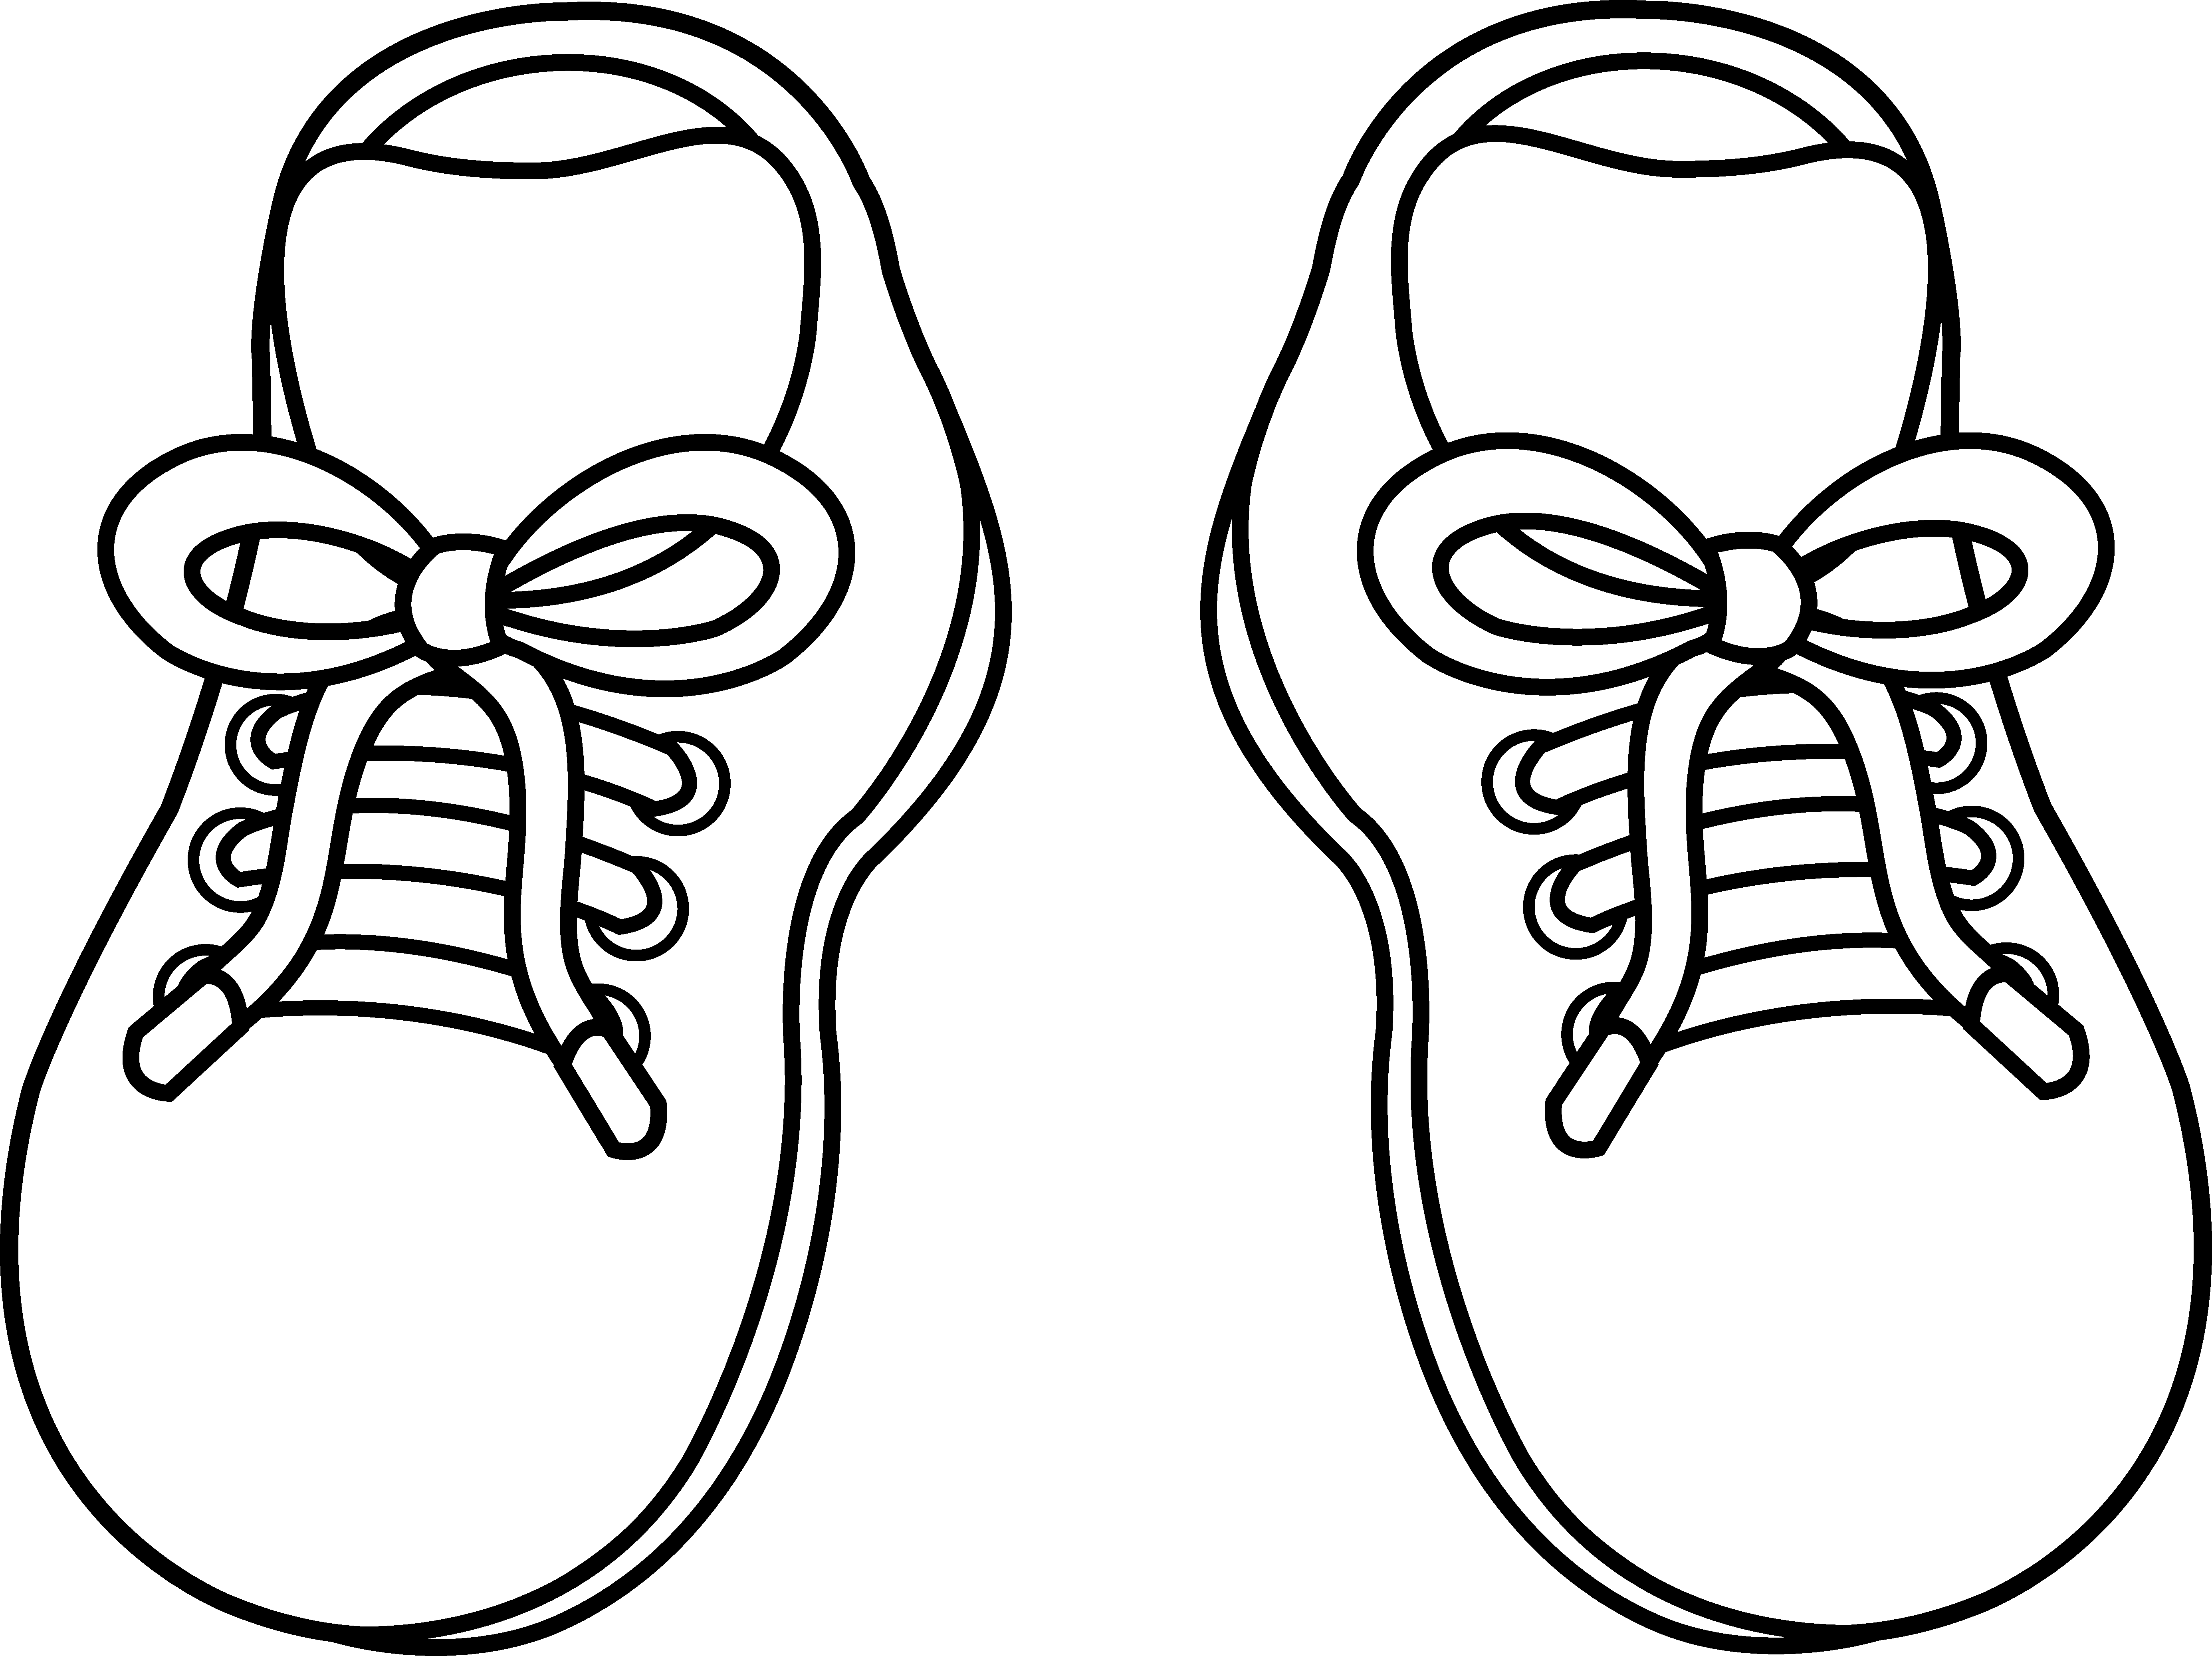 Diamonds clipart colouring page.  collection of shoe